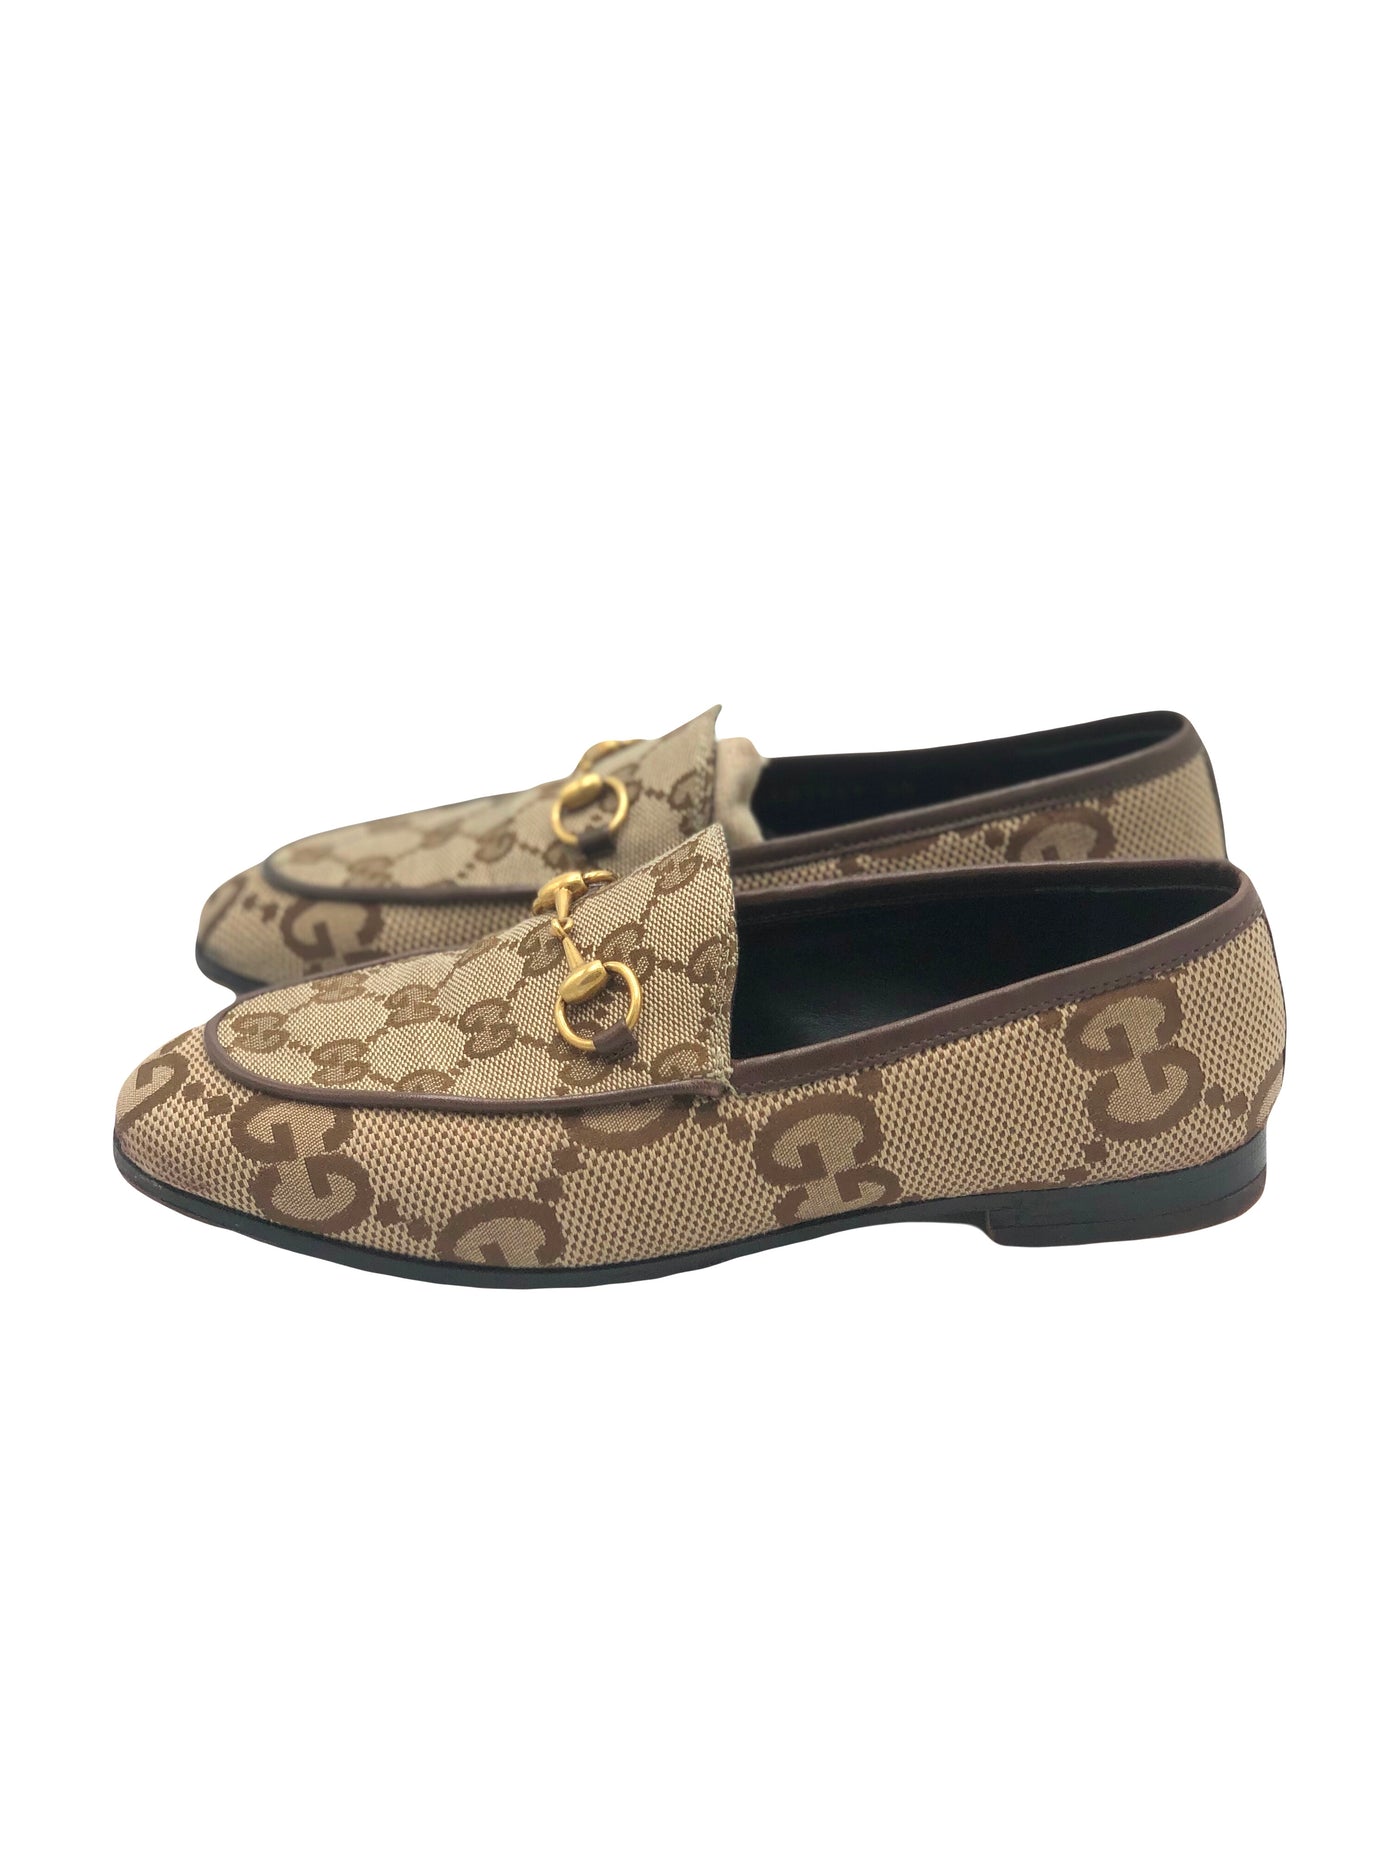 GUCCI GG Jacquard beige/brown Loafers size 36 RRP: £620